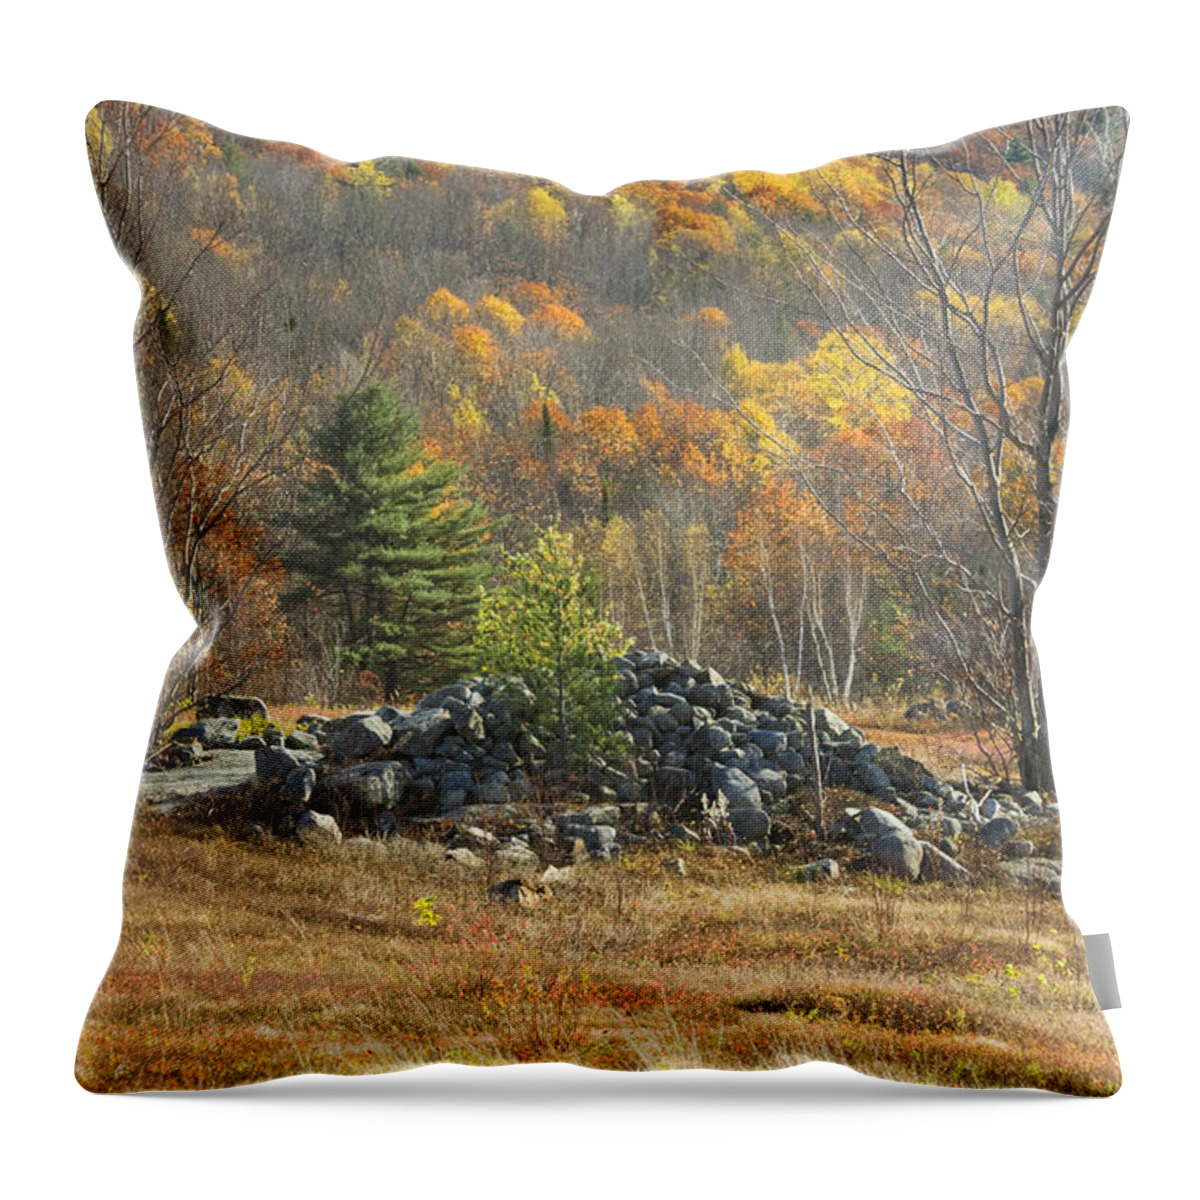 Maine Throw Pillow featuring the photograph Rock Pile In Maine Blueberry Field by Keith Webber Jr